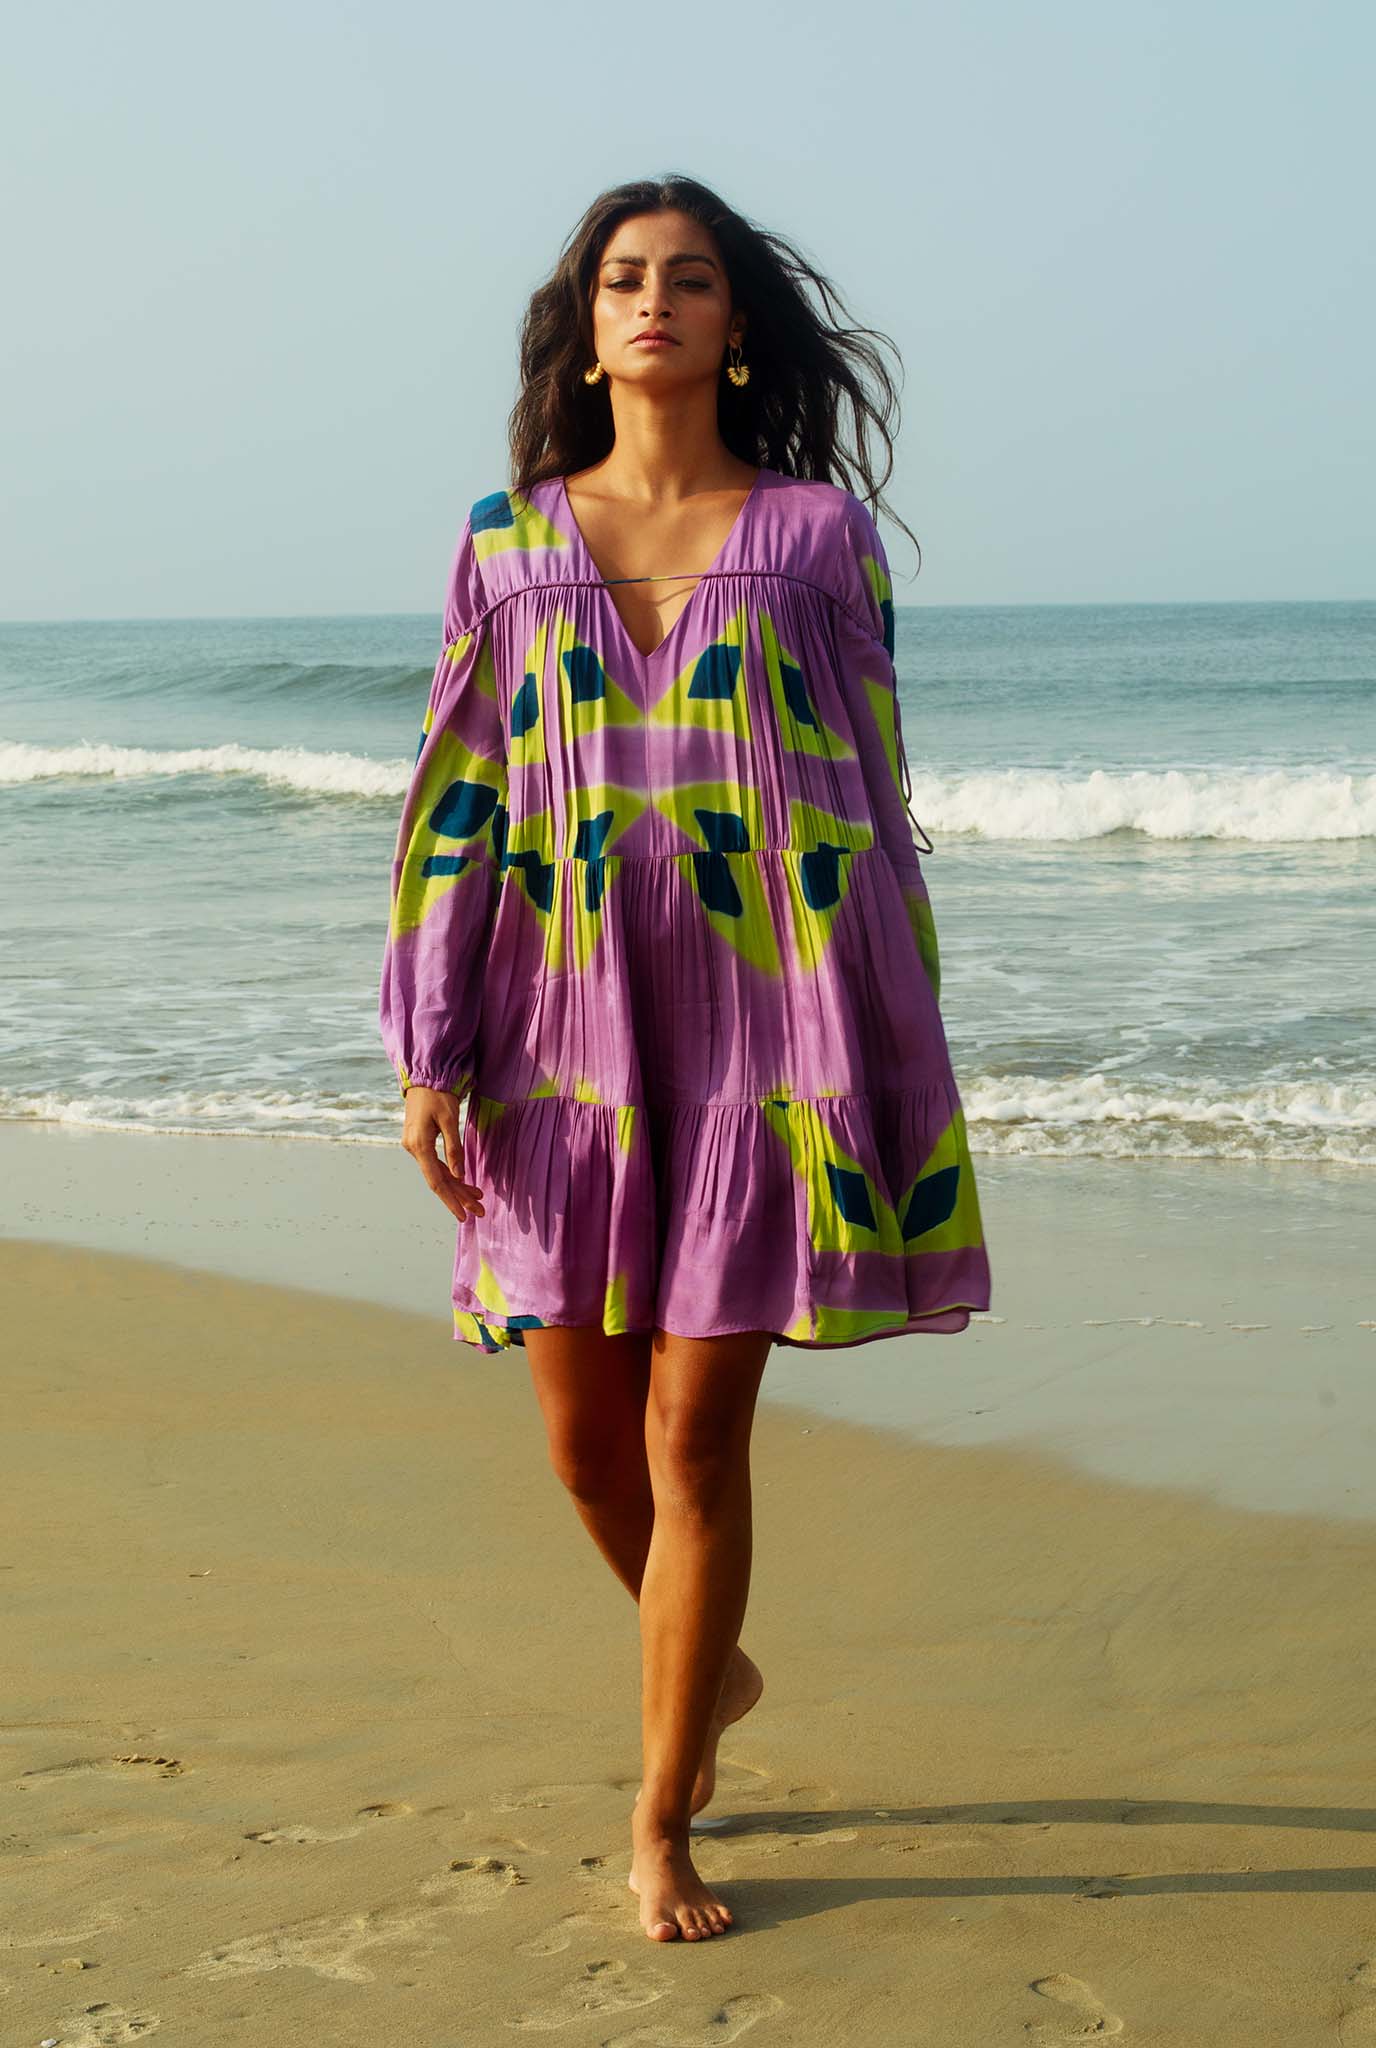 the-Jodi-life-muslin-silk-printed-dress-susegad-summer-clamp-dye-sustainable-hand-dyed-lilac-handmade